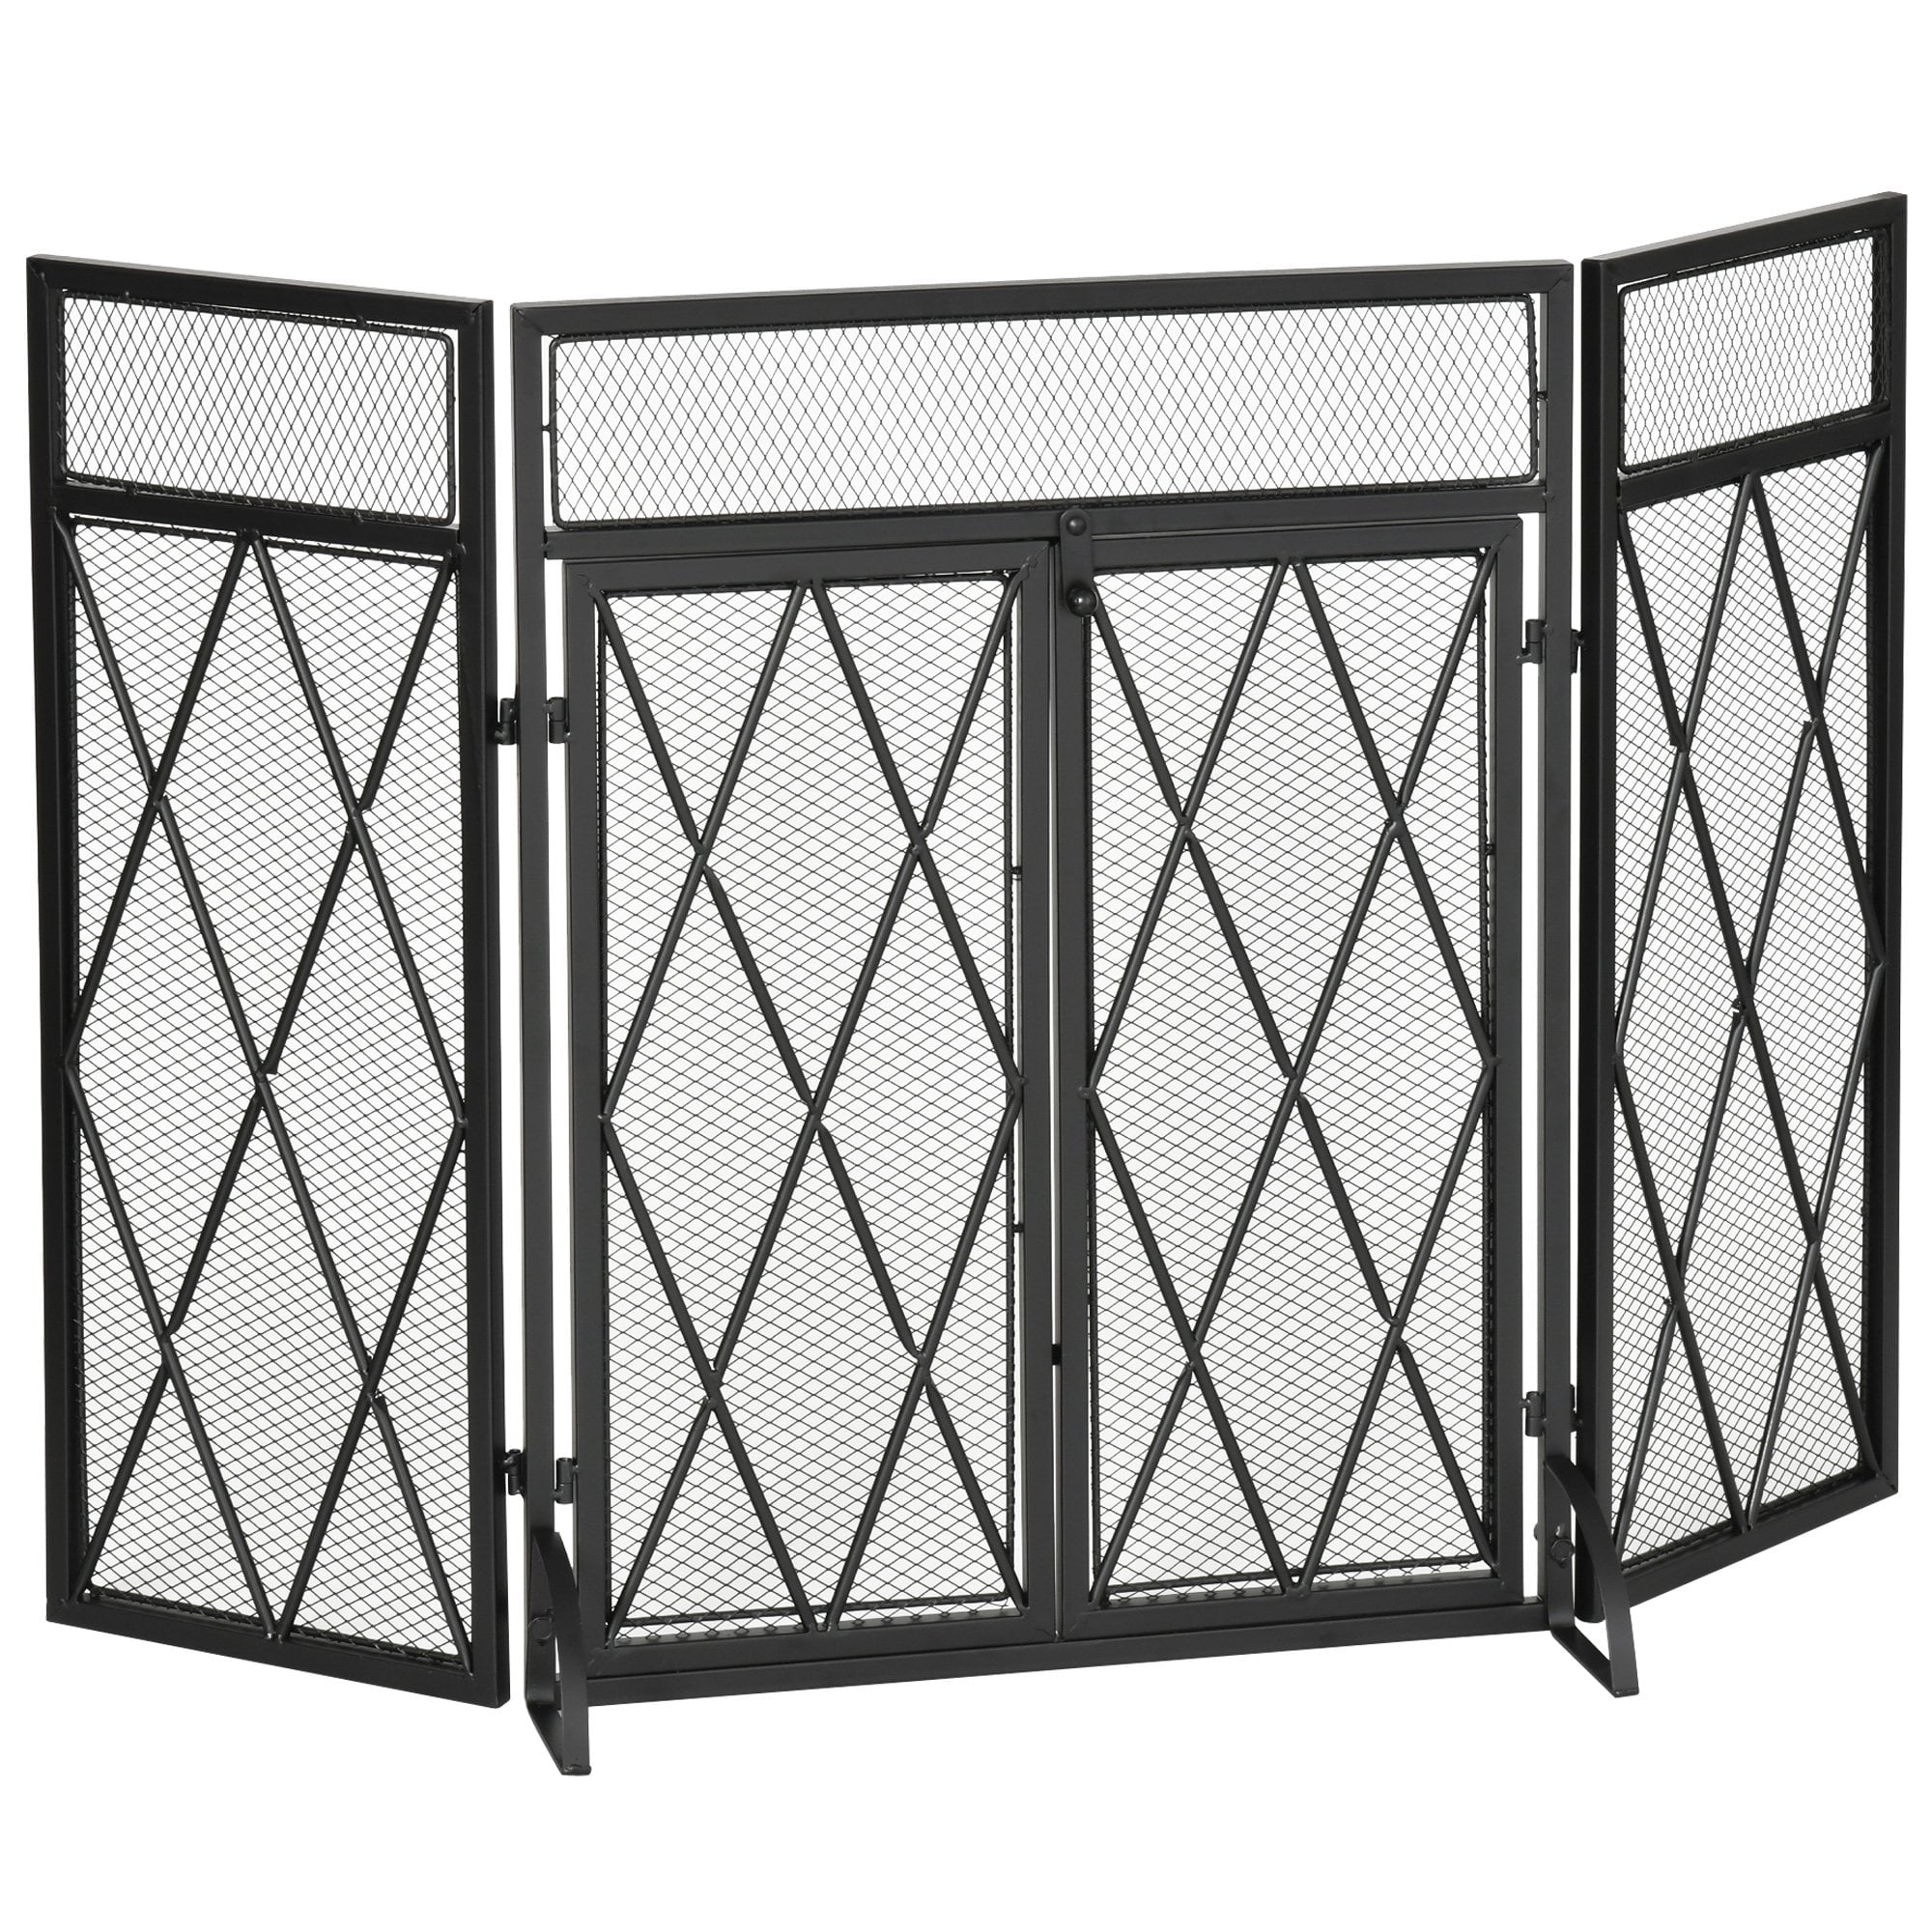 Details about   3-Panel Folding Fireplace Screen Panel Wrought Mesh Spark Guard Protector Gate 